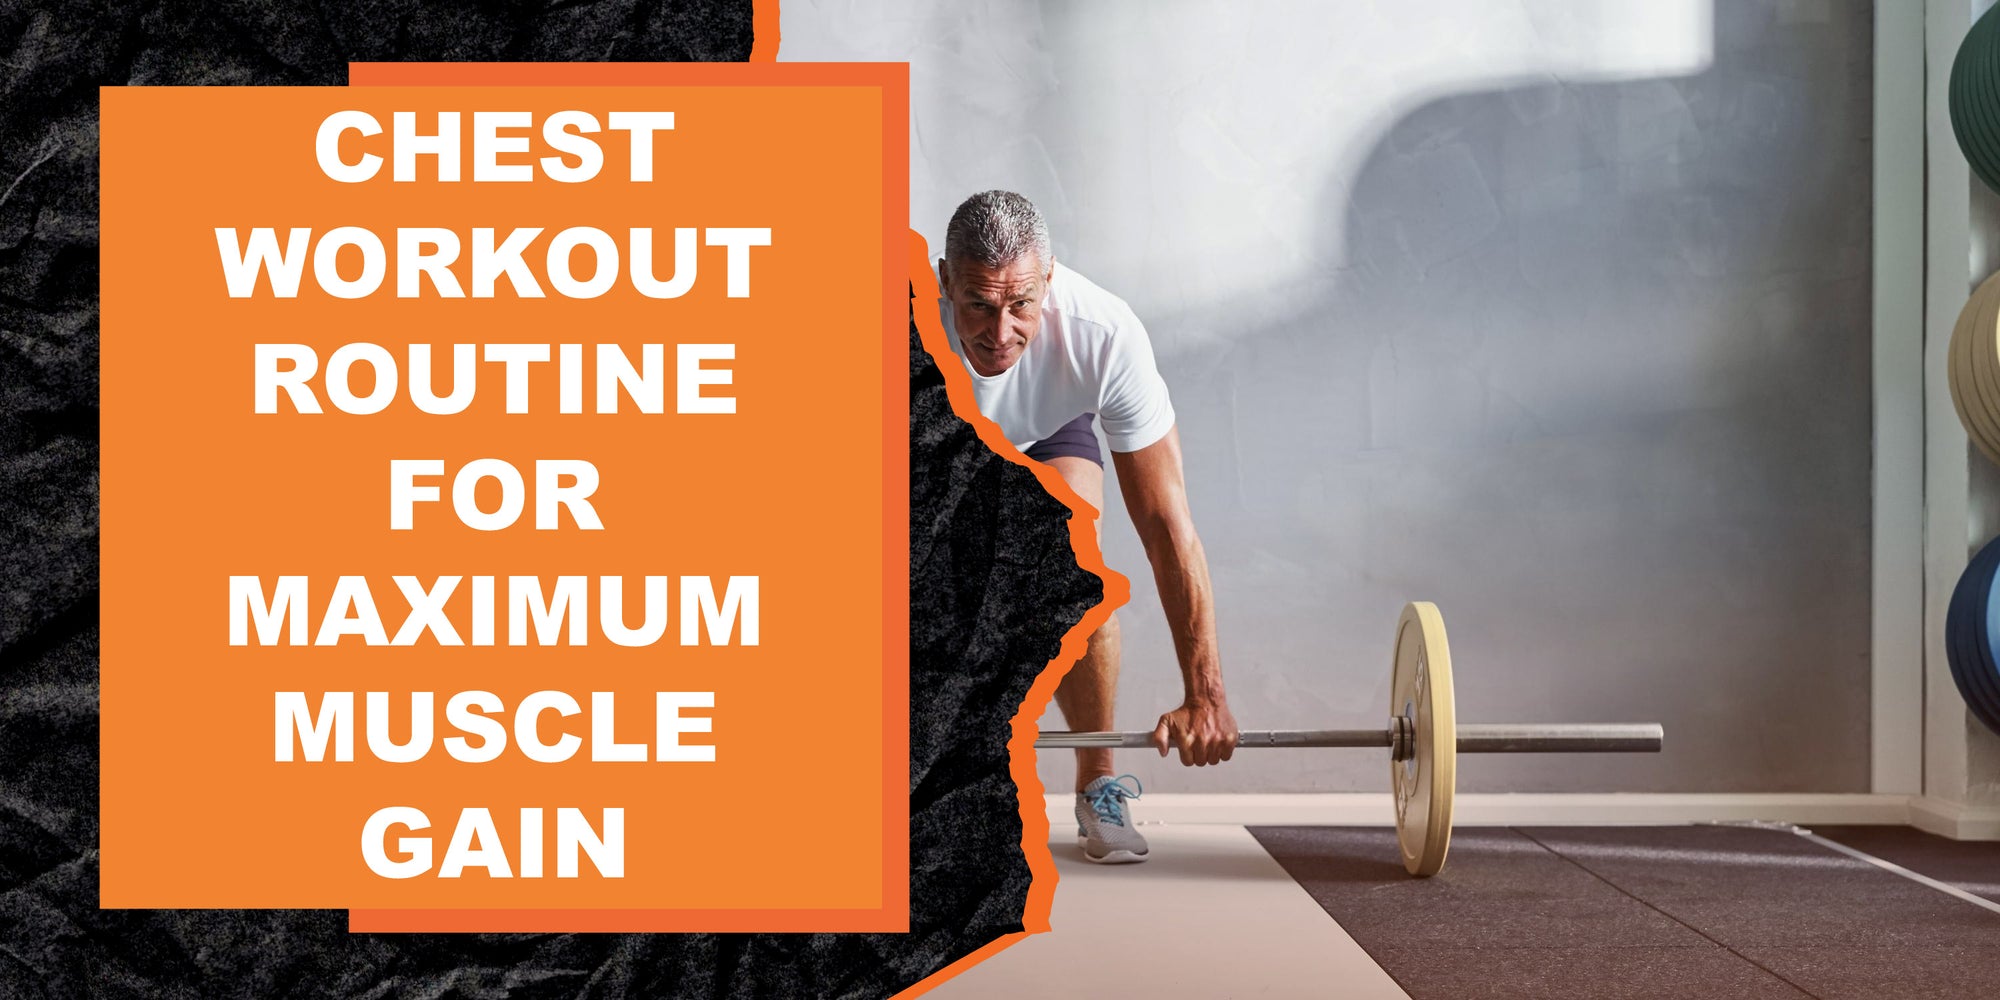 The Ultimate Chest Workout Routine for Maximum Muscle Gain